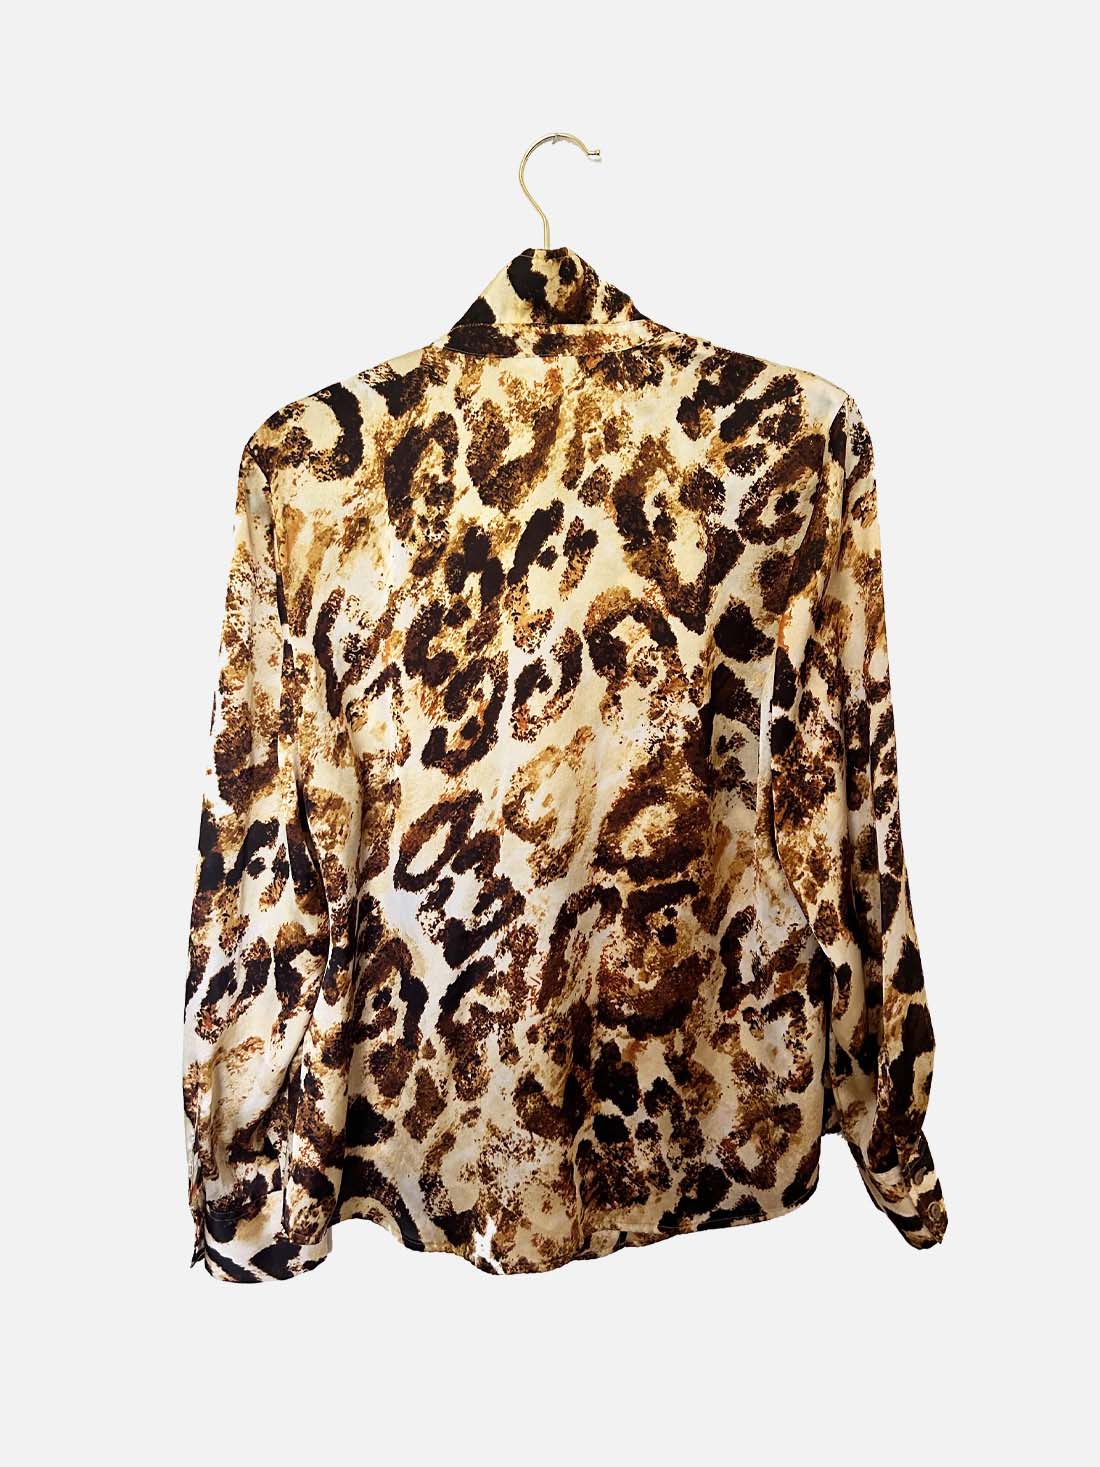 Brown and Gold Zebra Print Blouse